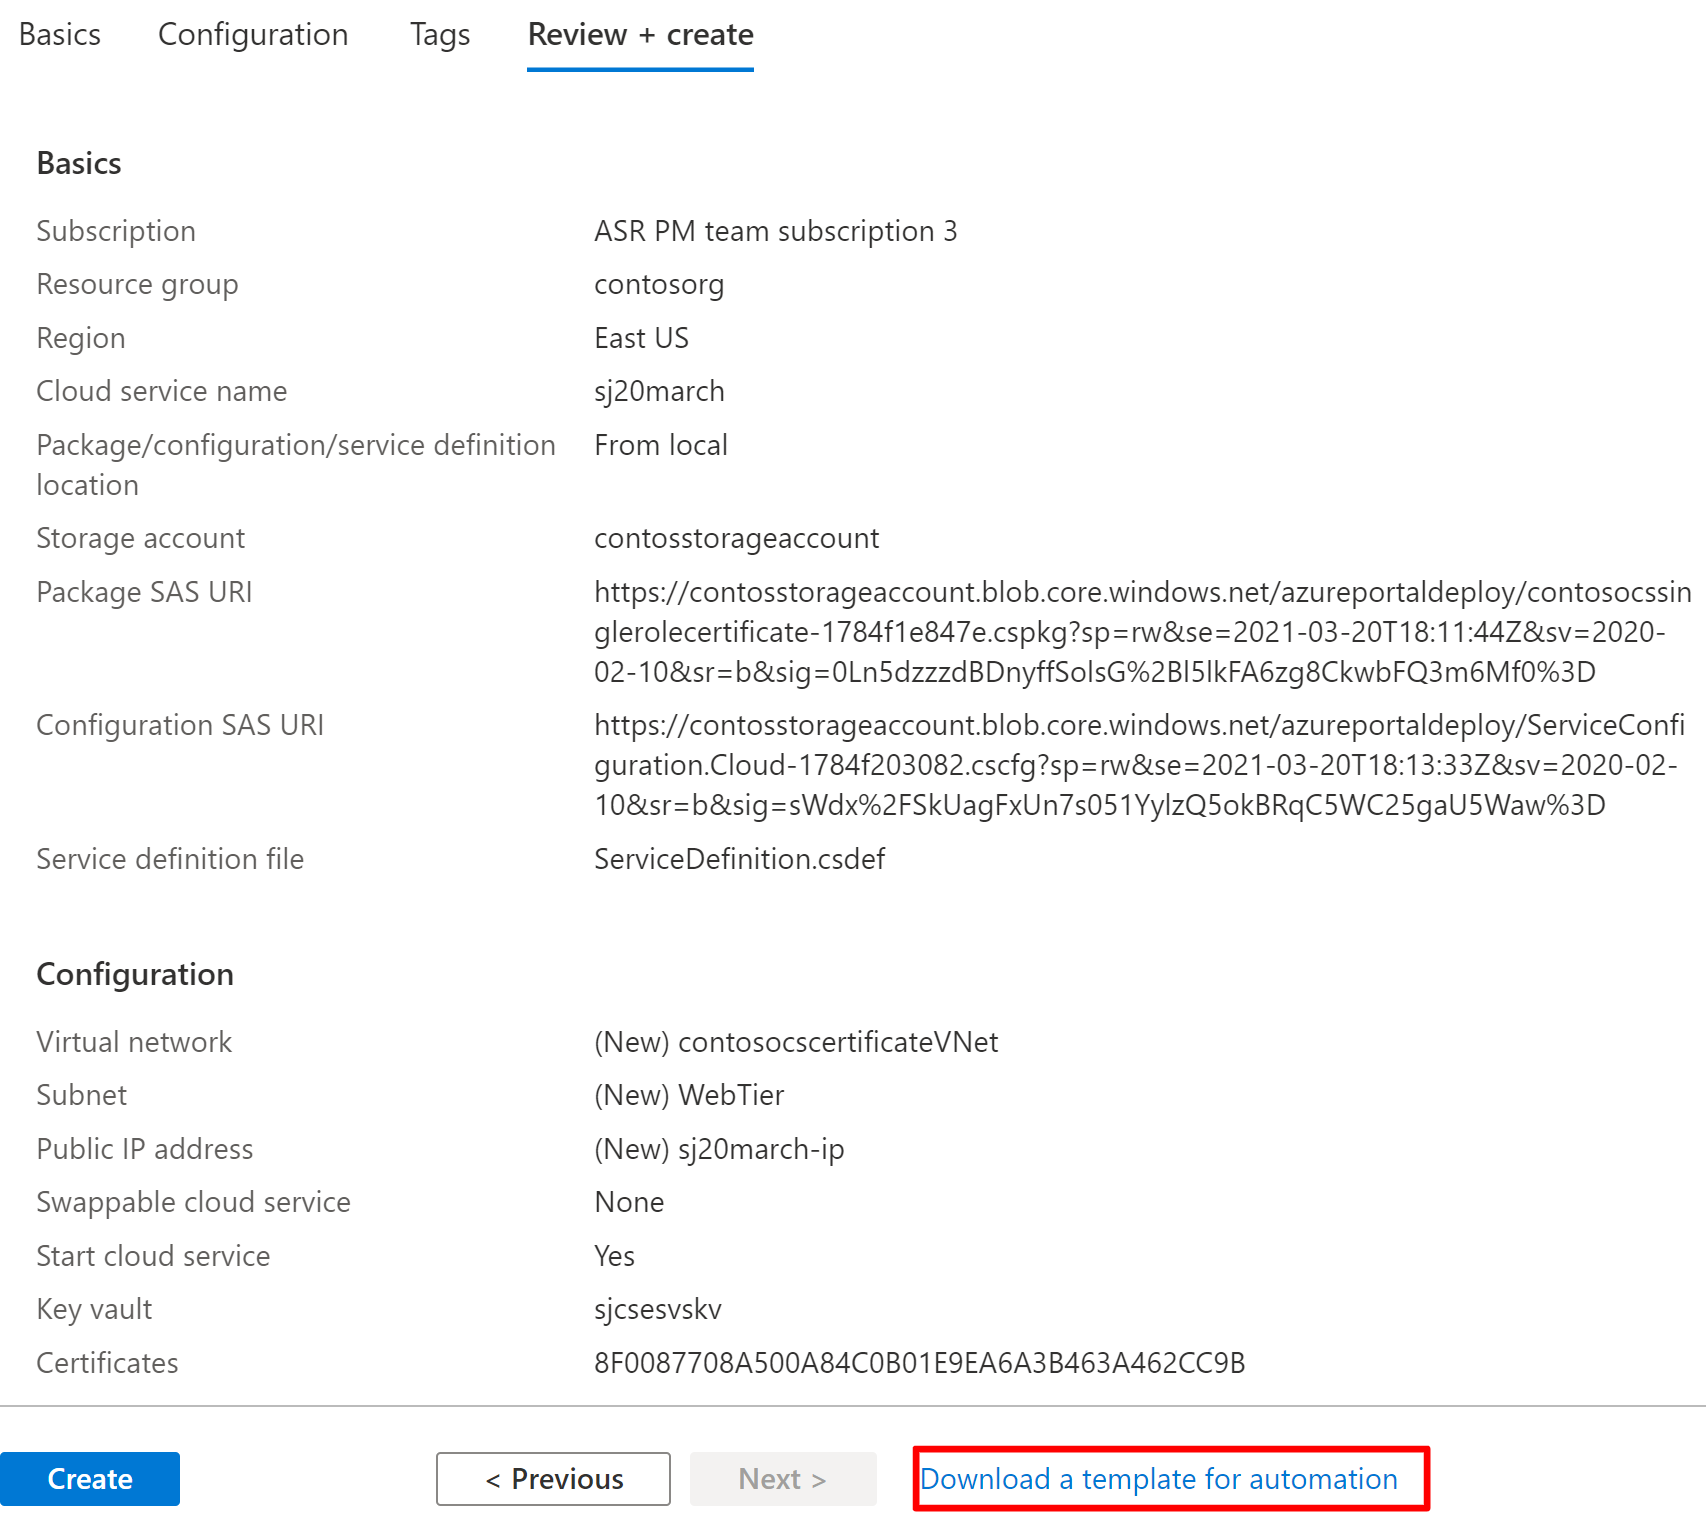 Image shows downloading the template under cloud service (extended support) on the Azure portal.